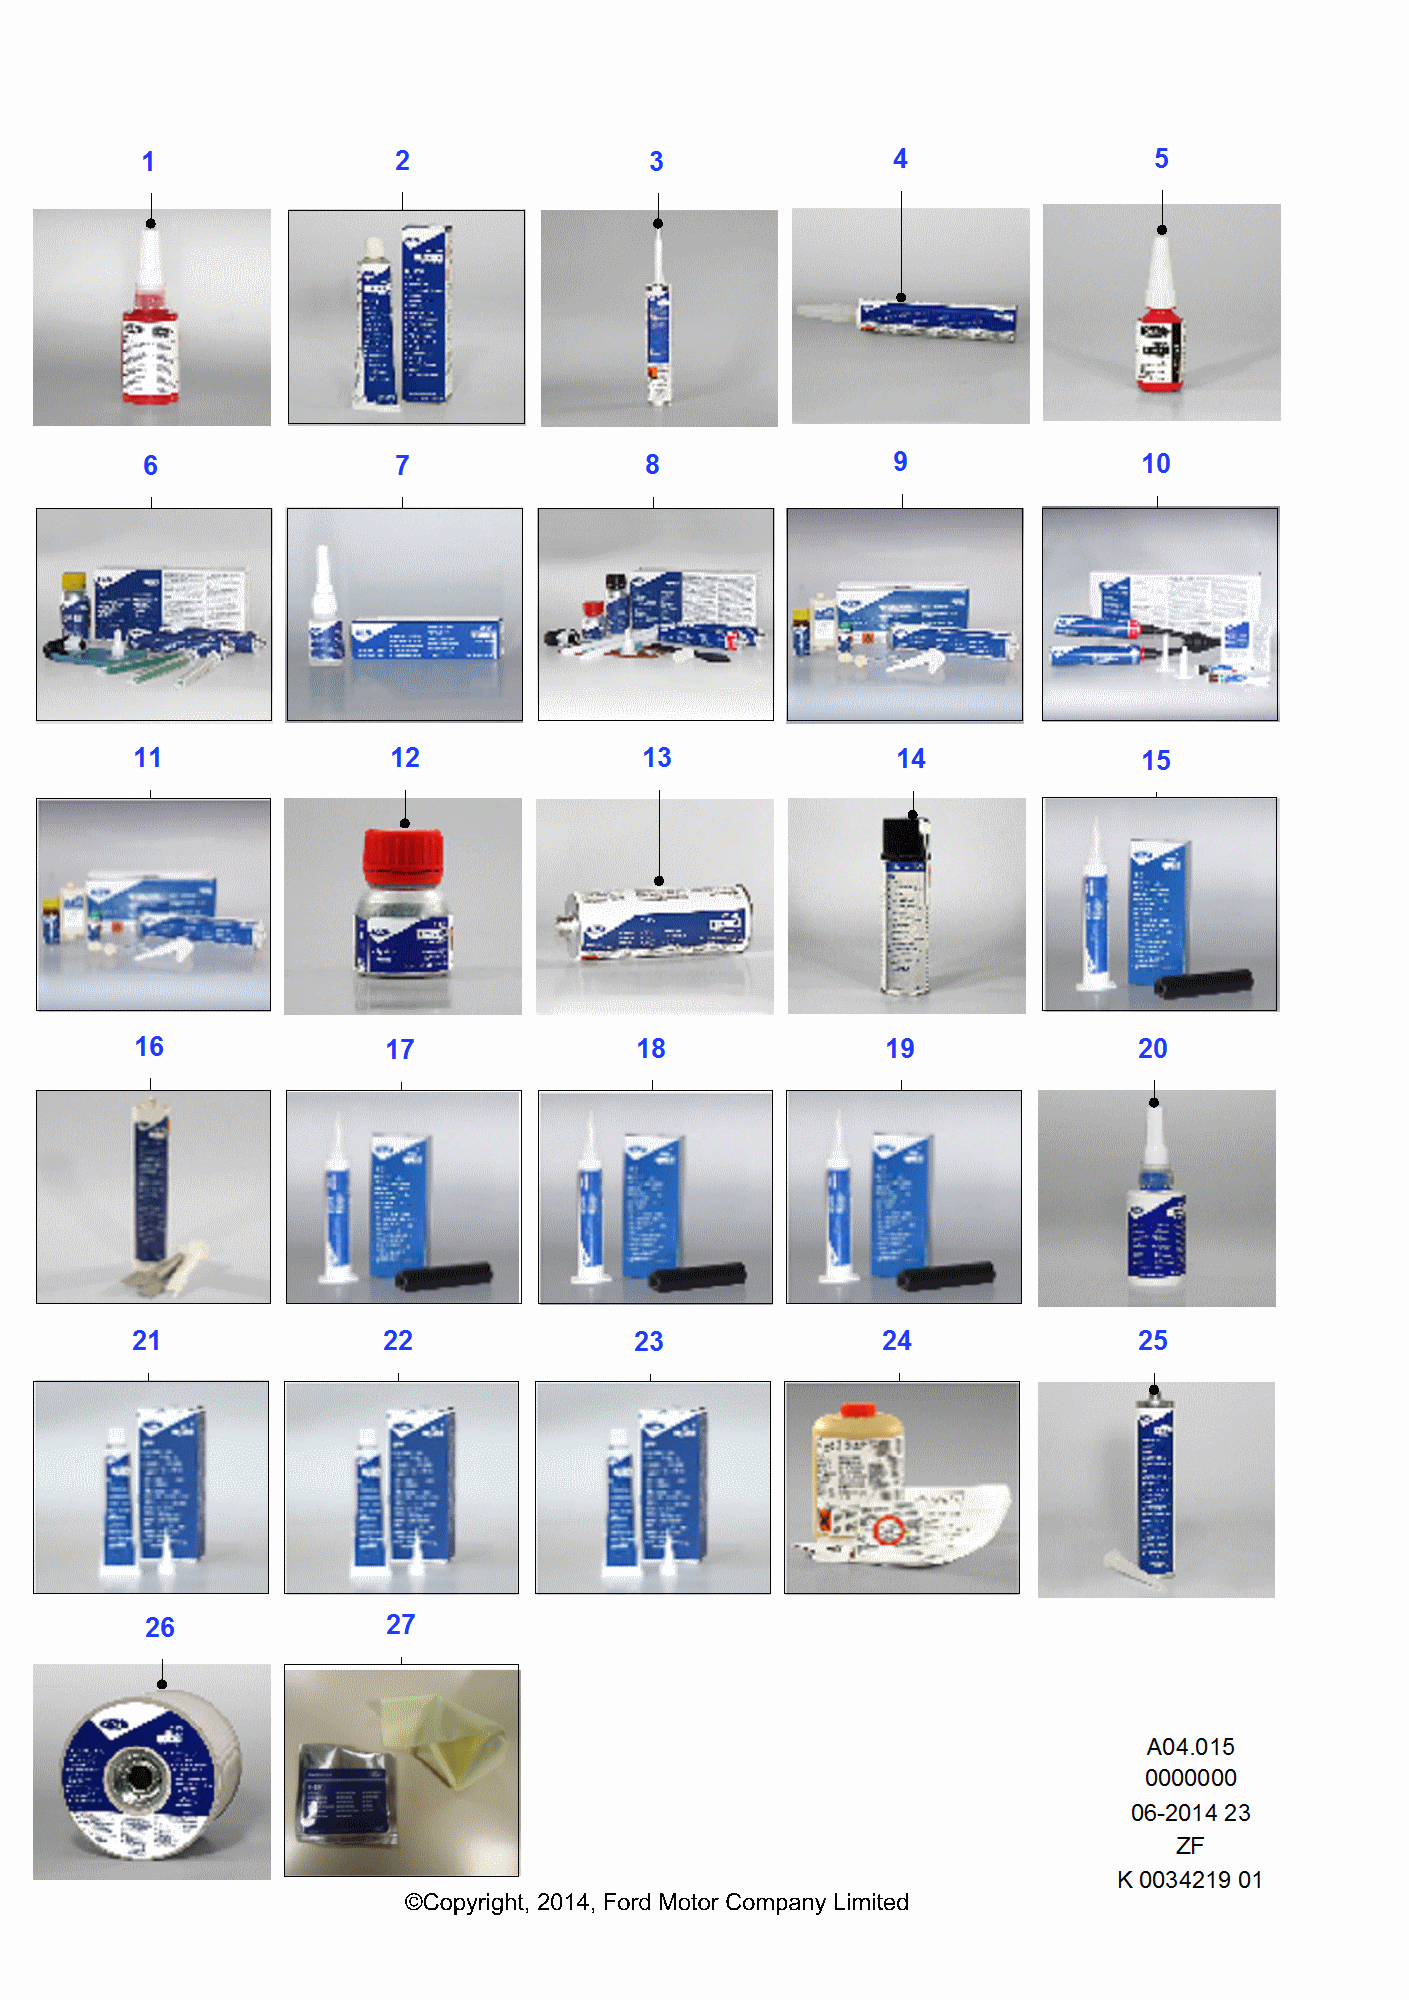 Sealing Compounds And Adhesives สำหรับ Ford Fiesta Fiesta 1989-1996               (CX)